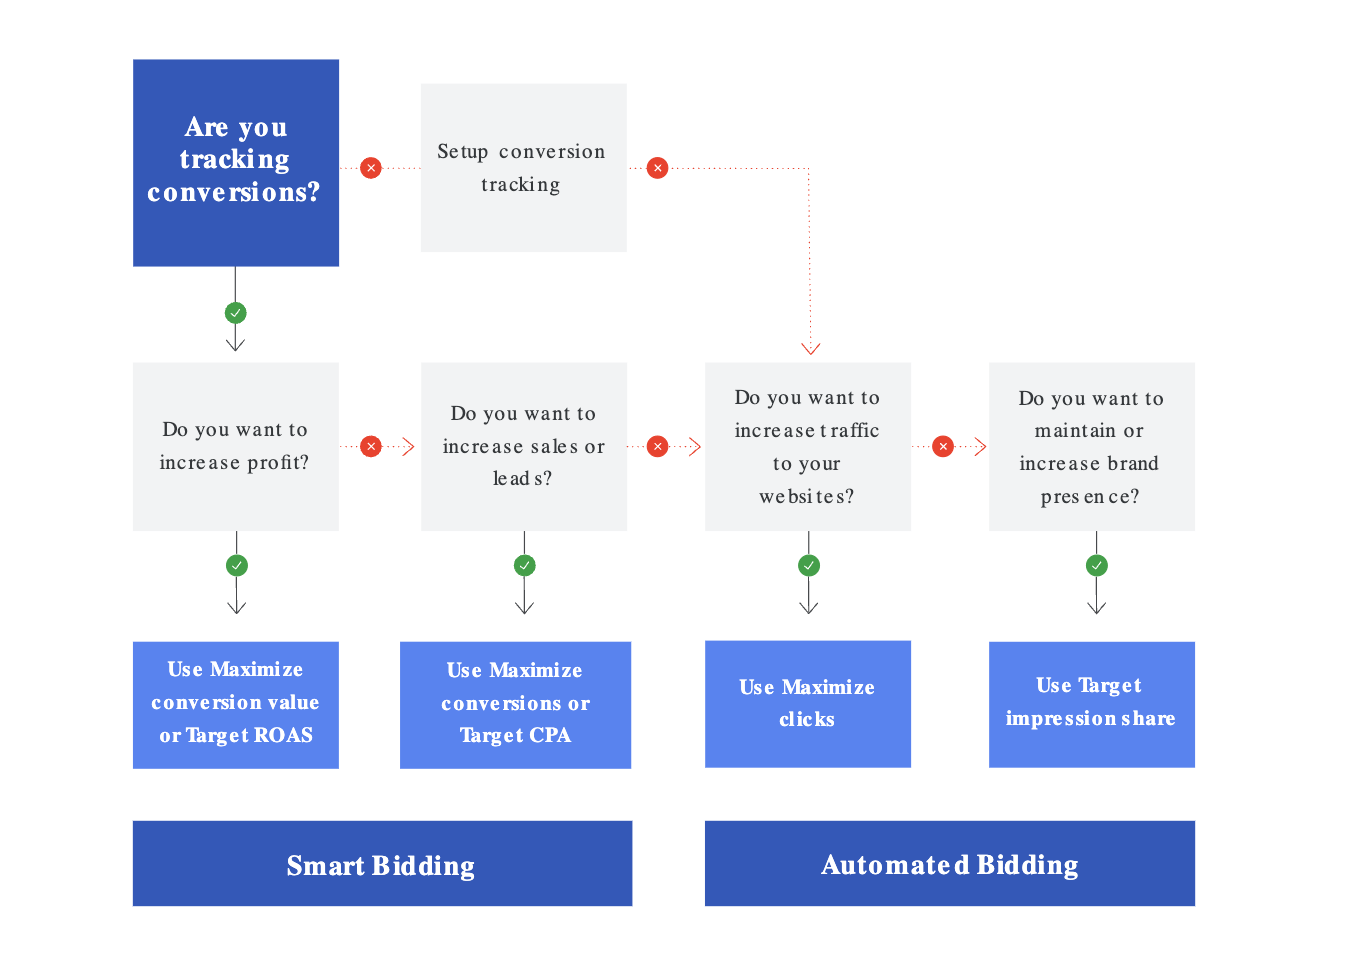 Difference between smart bidding and automated bidding.